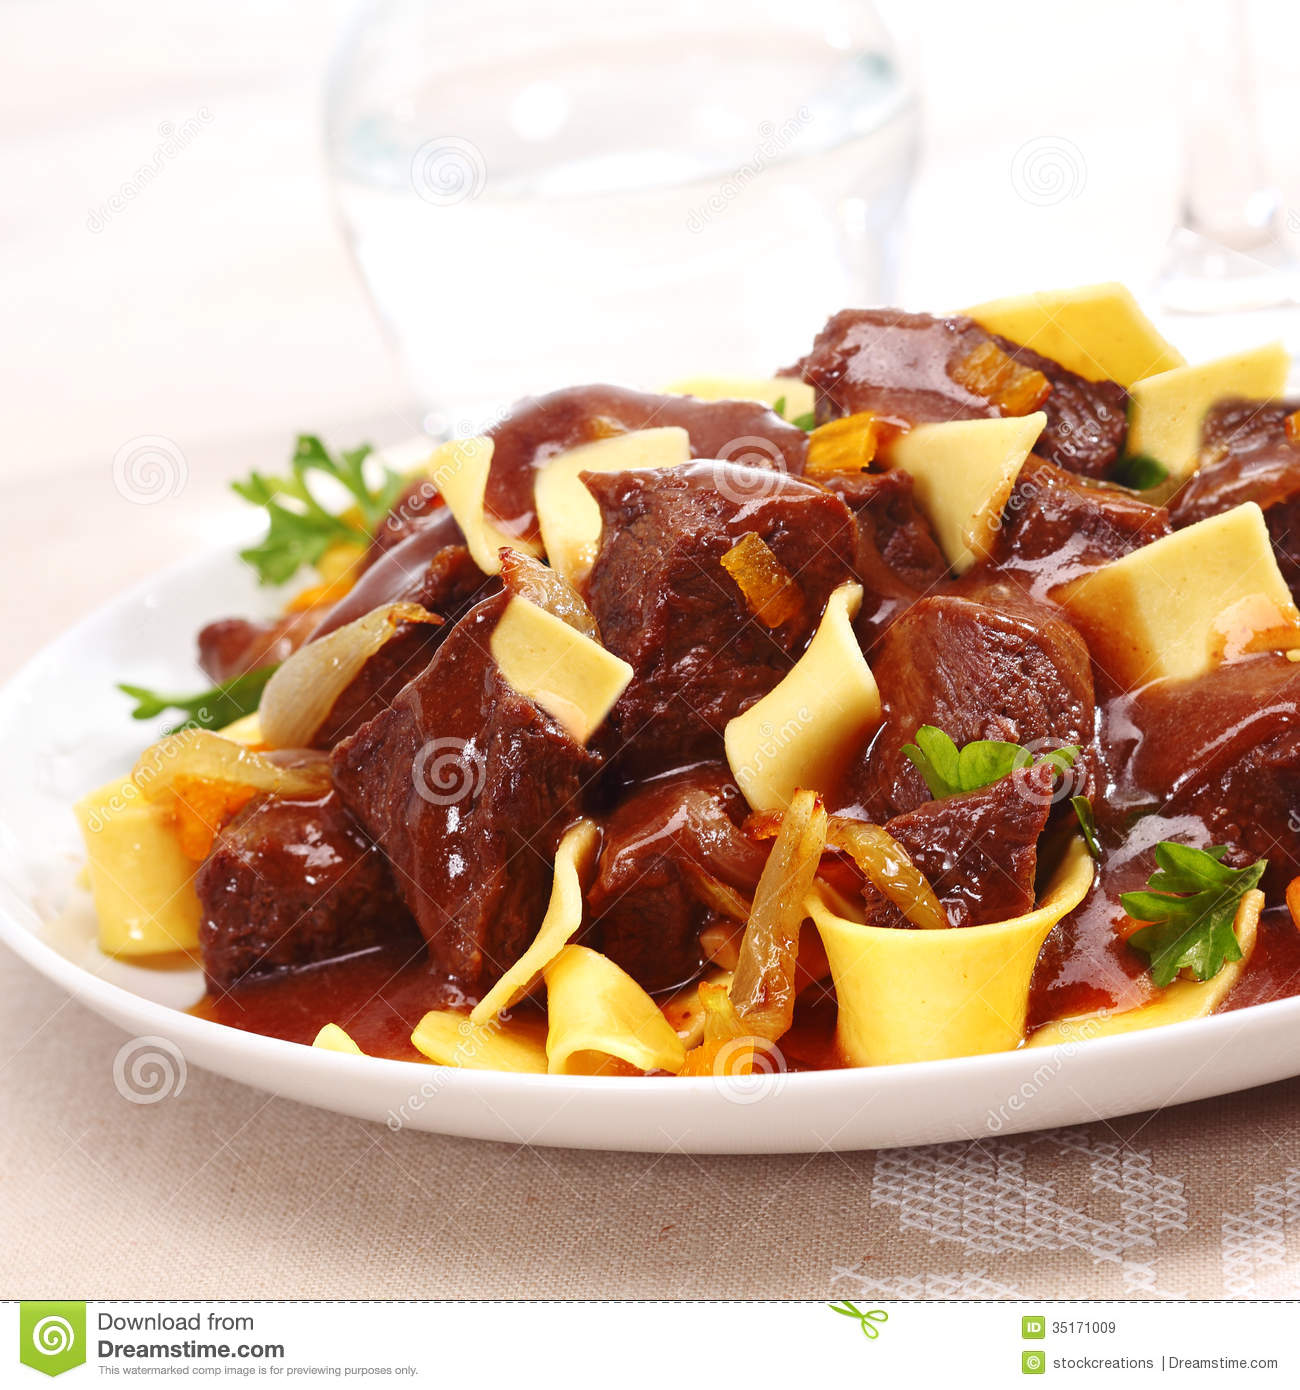 Close Up Of Beef Goulash And Noodles Royalty Free Stock Images   Image    